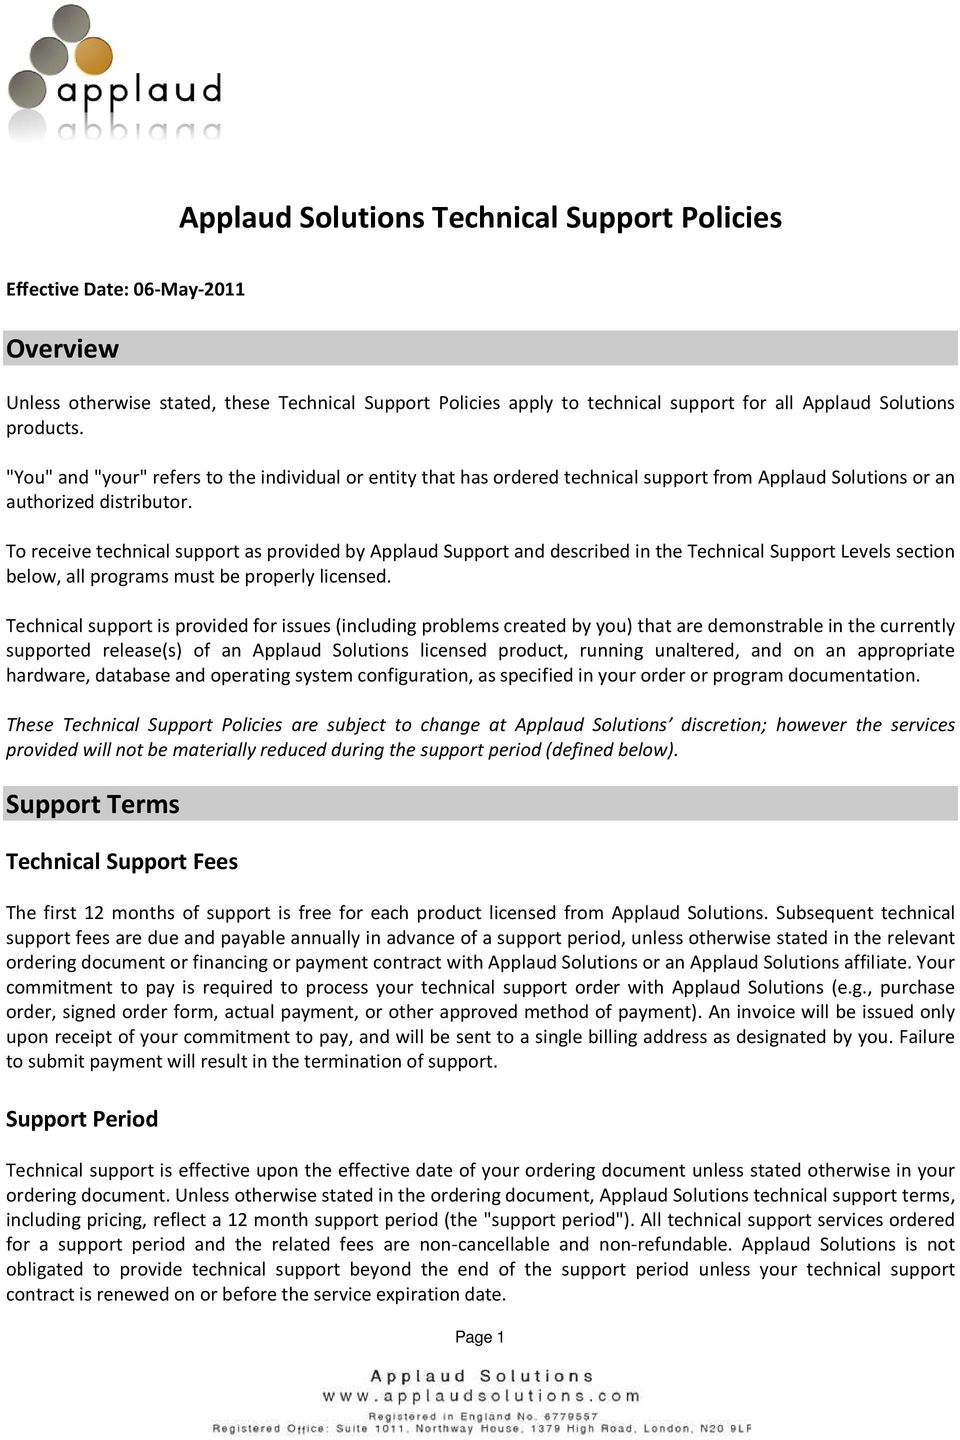 To receive technical support as provided by Applaud Support and described in the Technical Support Levels section below, all programs must be properly licensed.